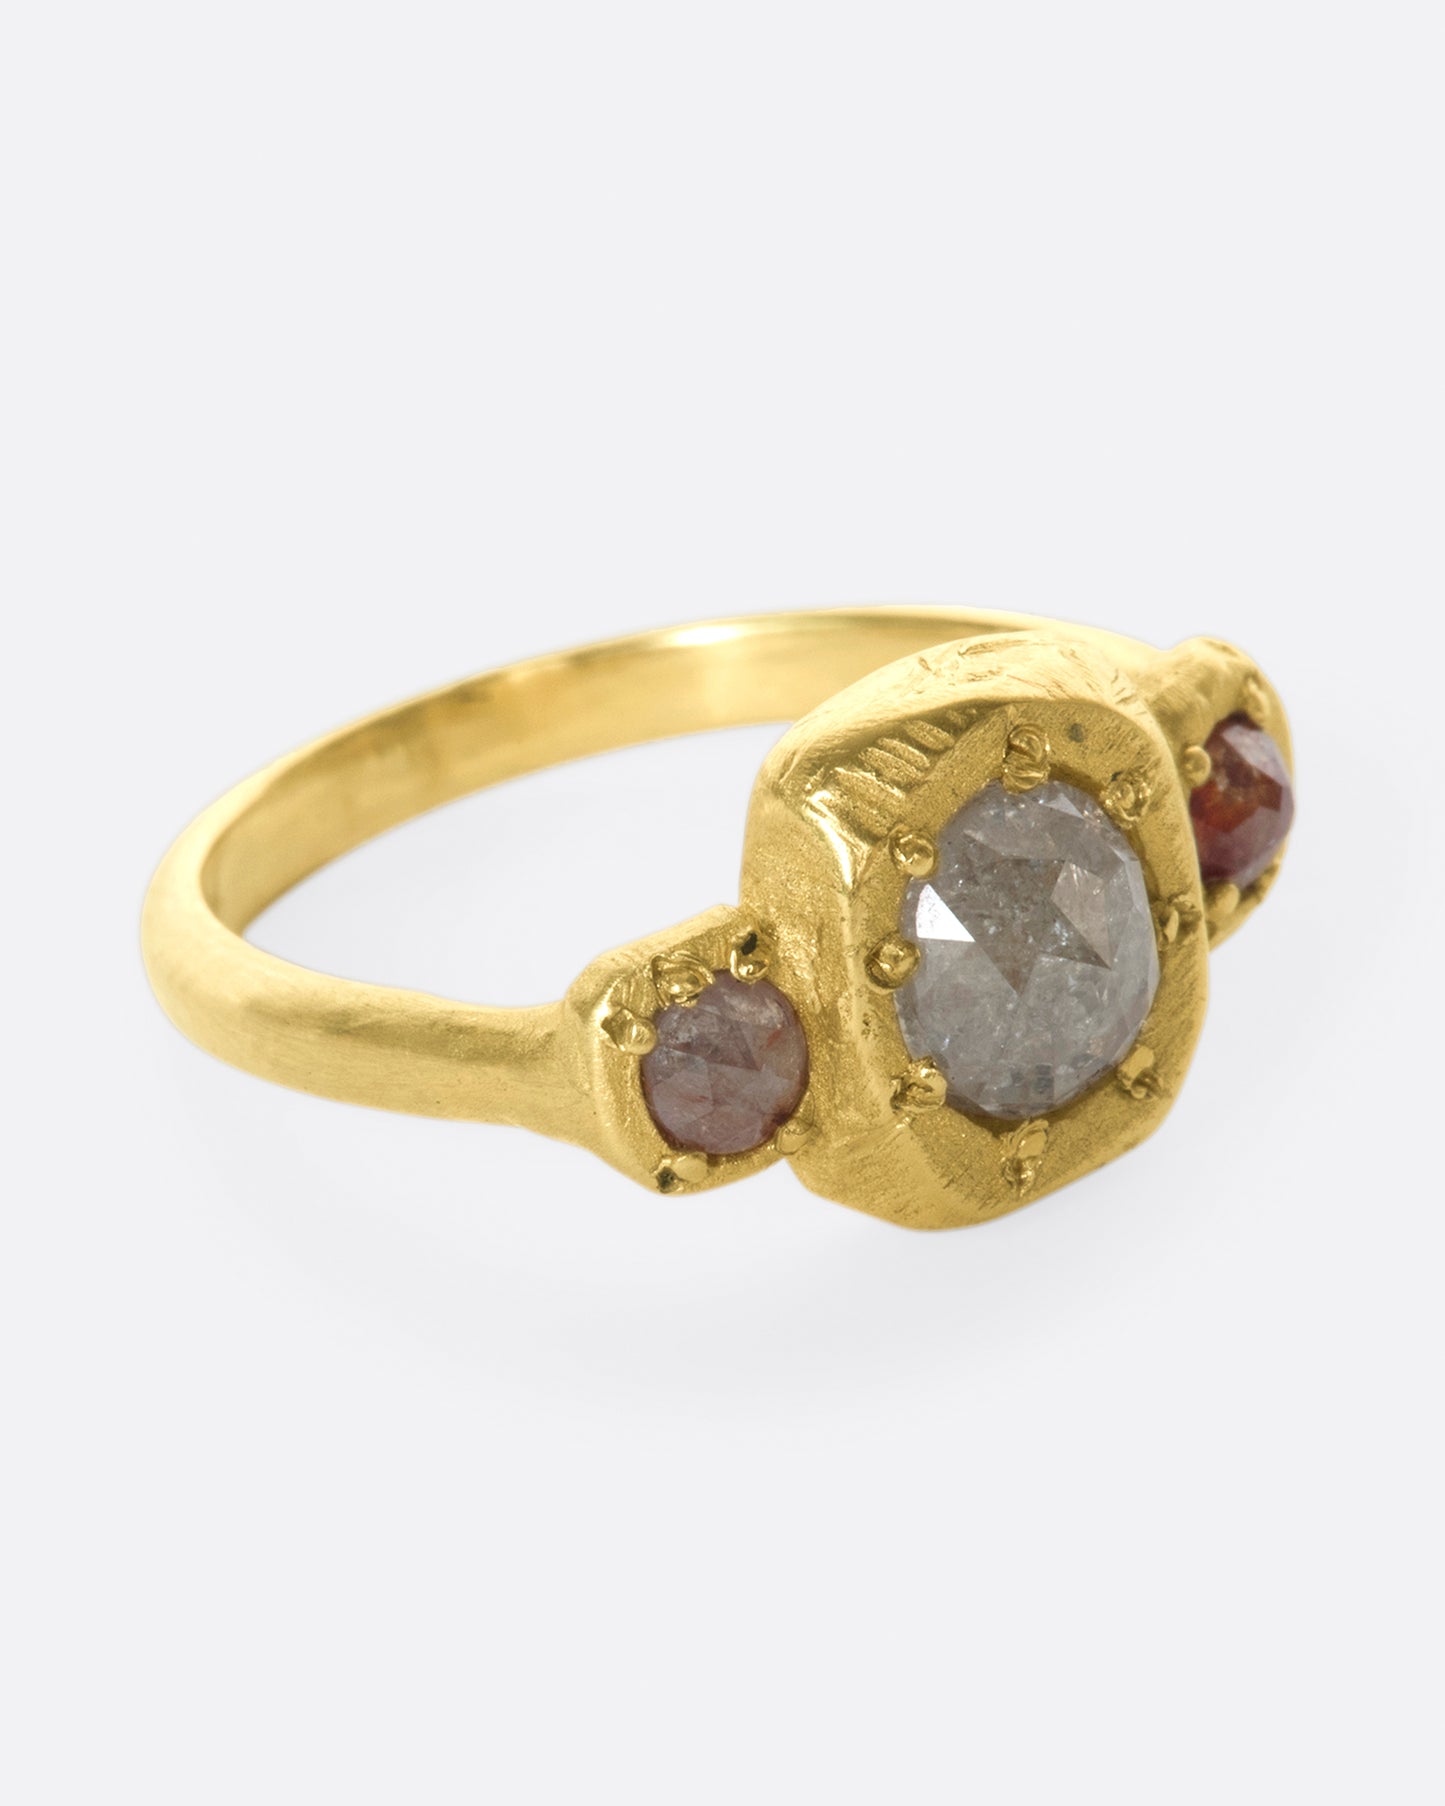 A one of a kind, organic take on a traditional trio ring.